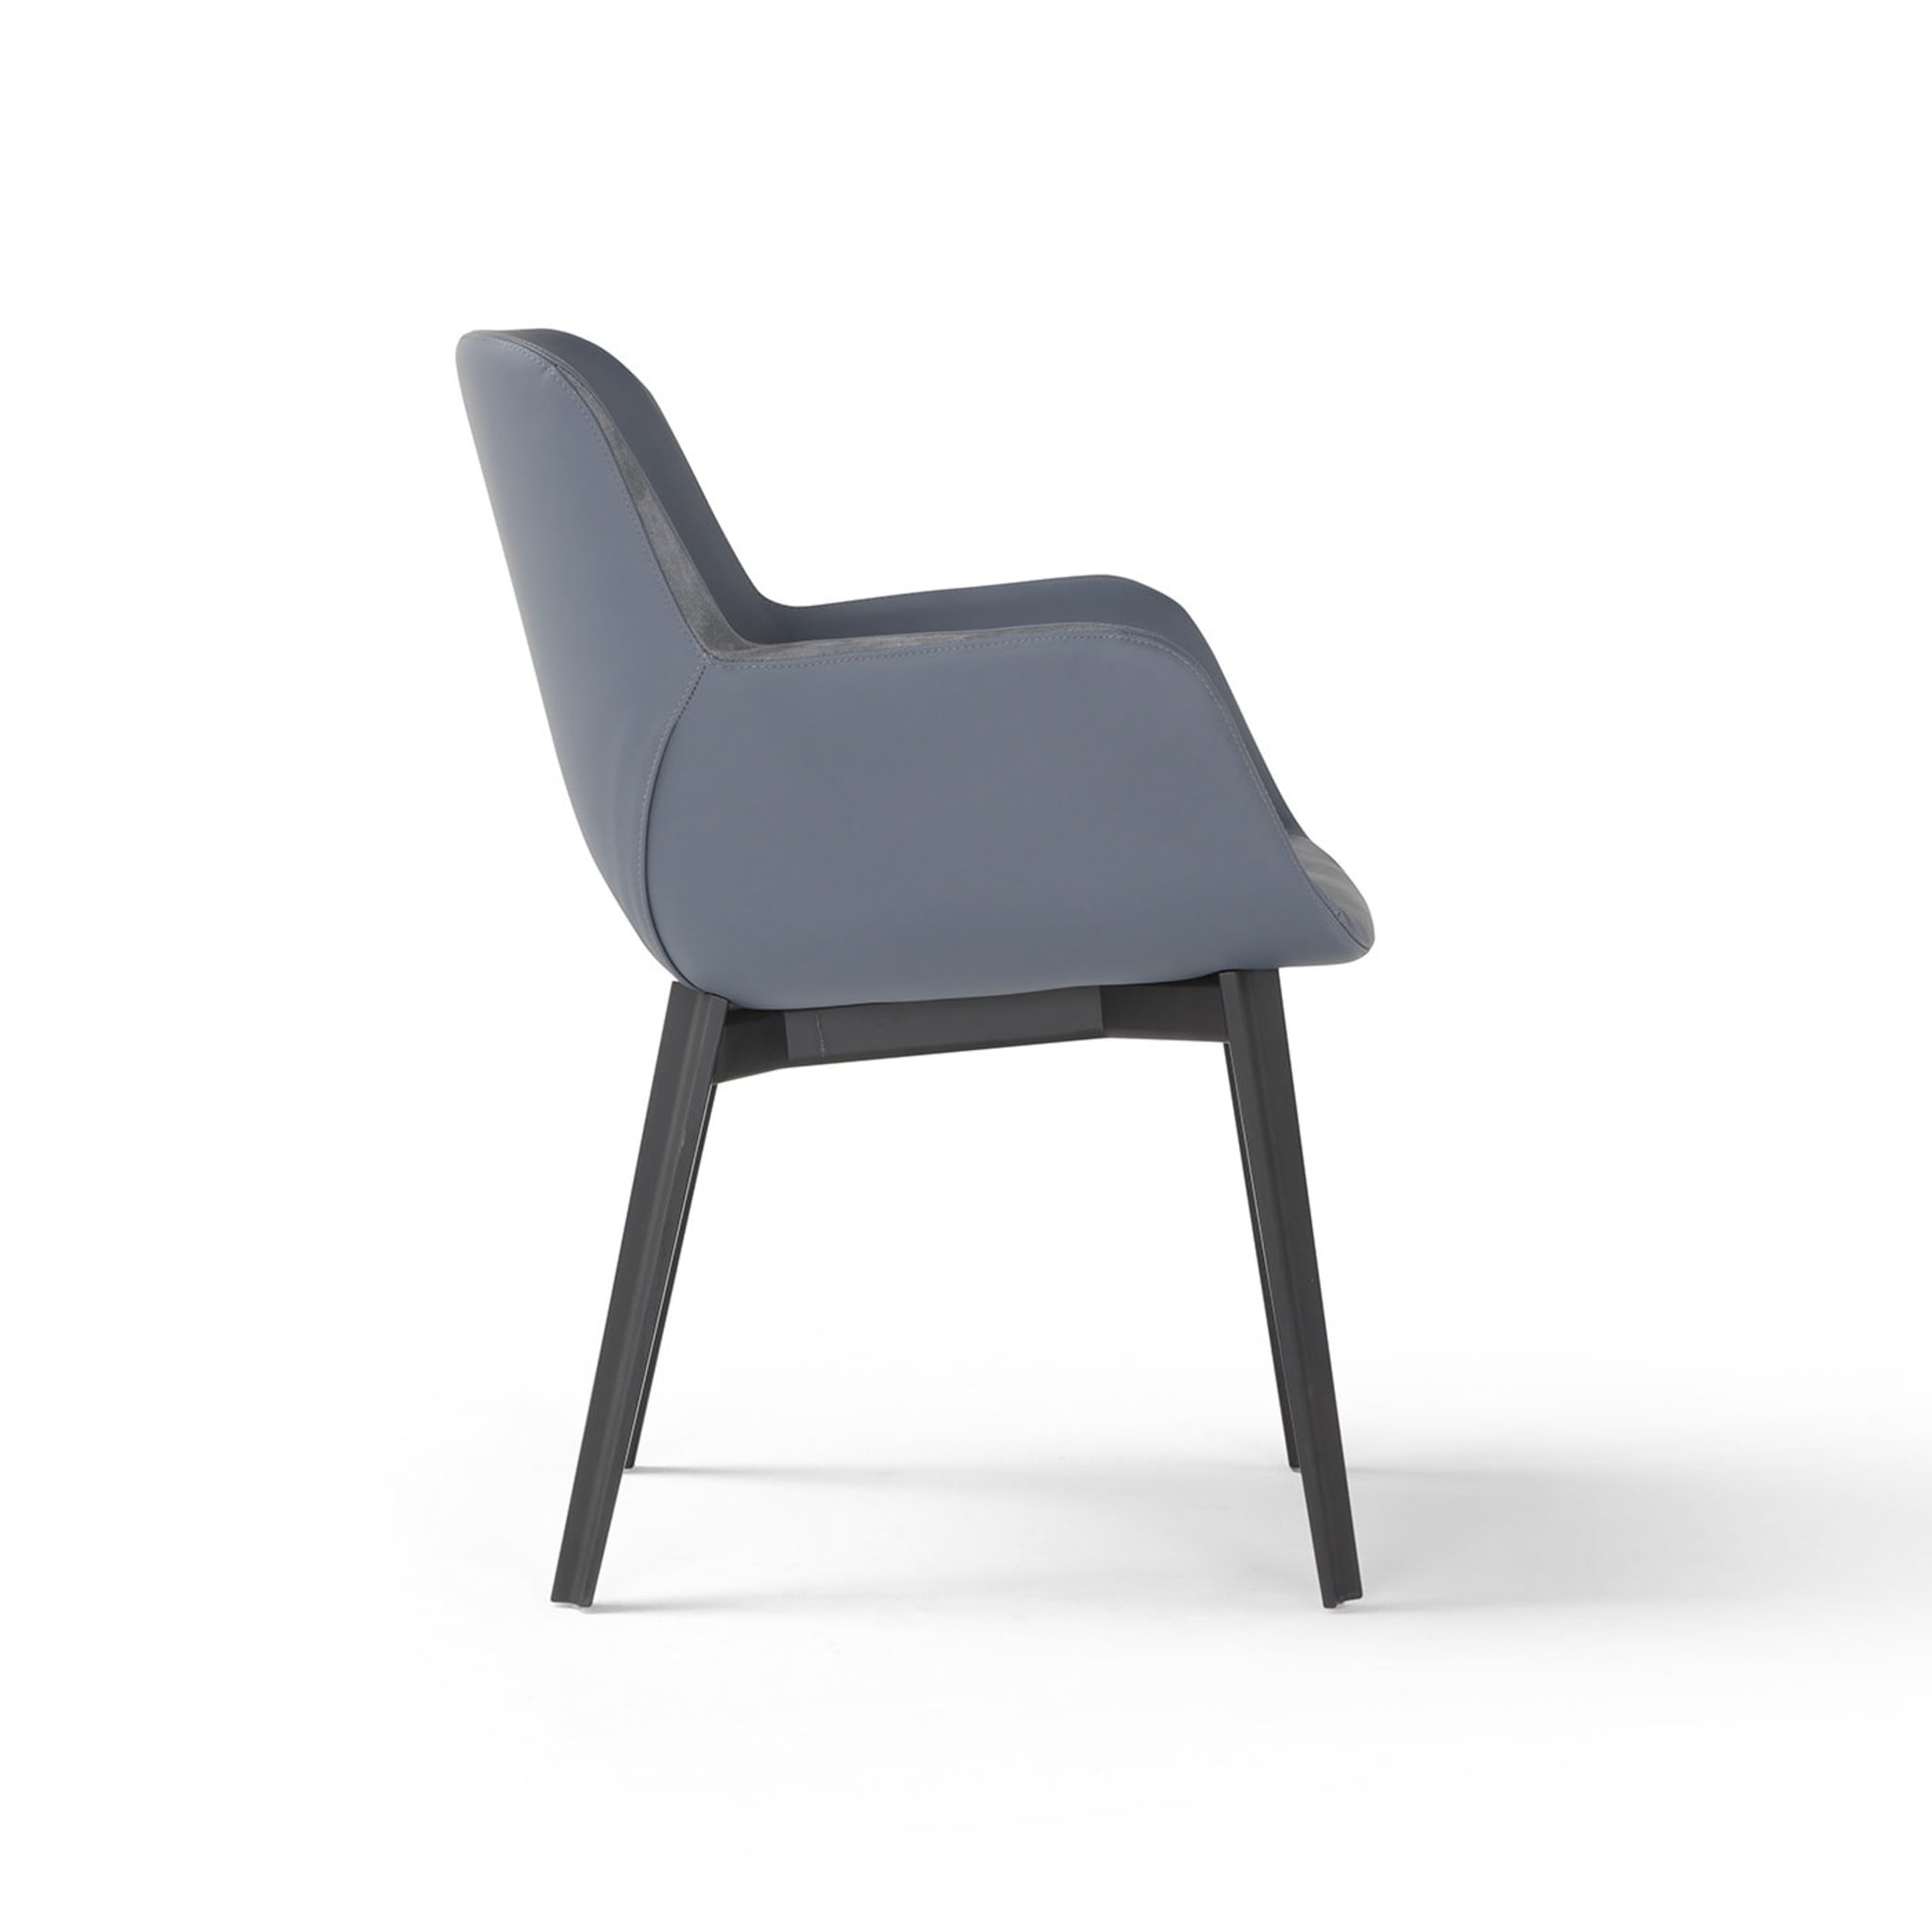 Panis Gray Leather Chair - Alternative view 4